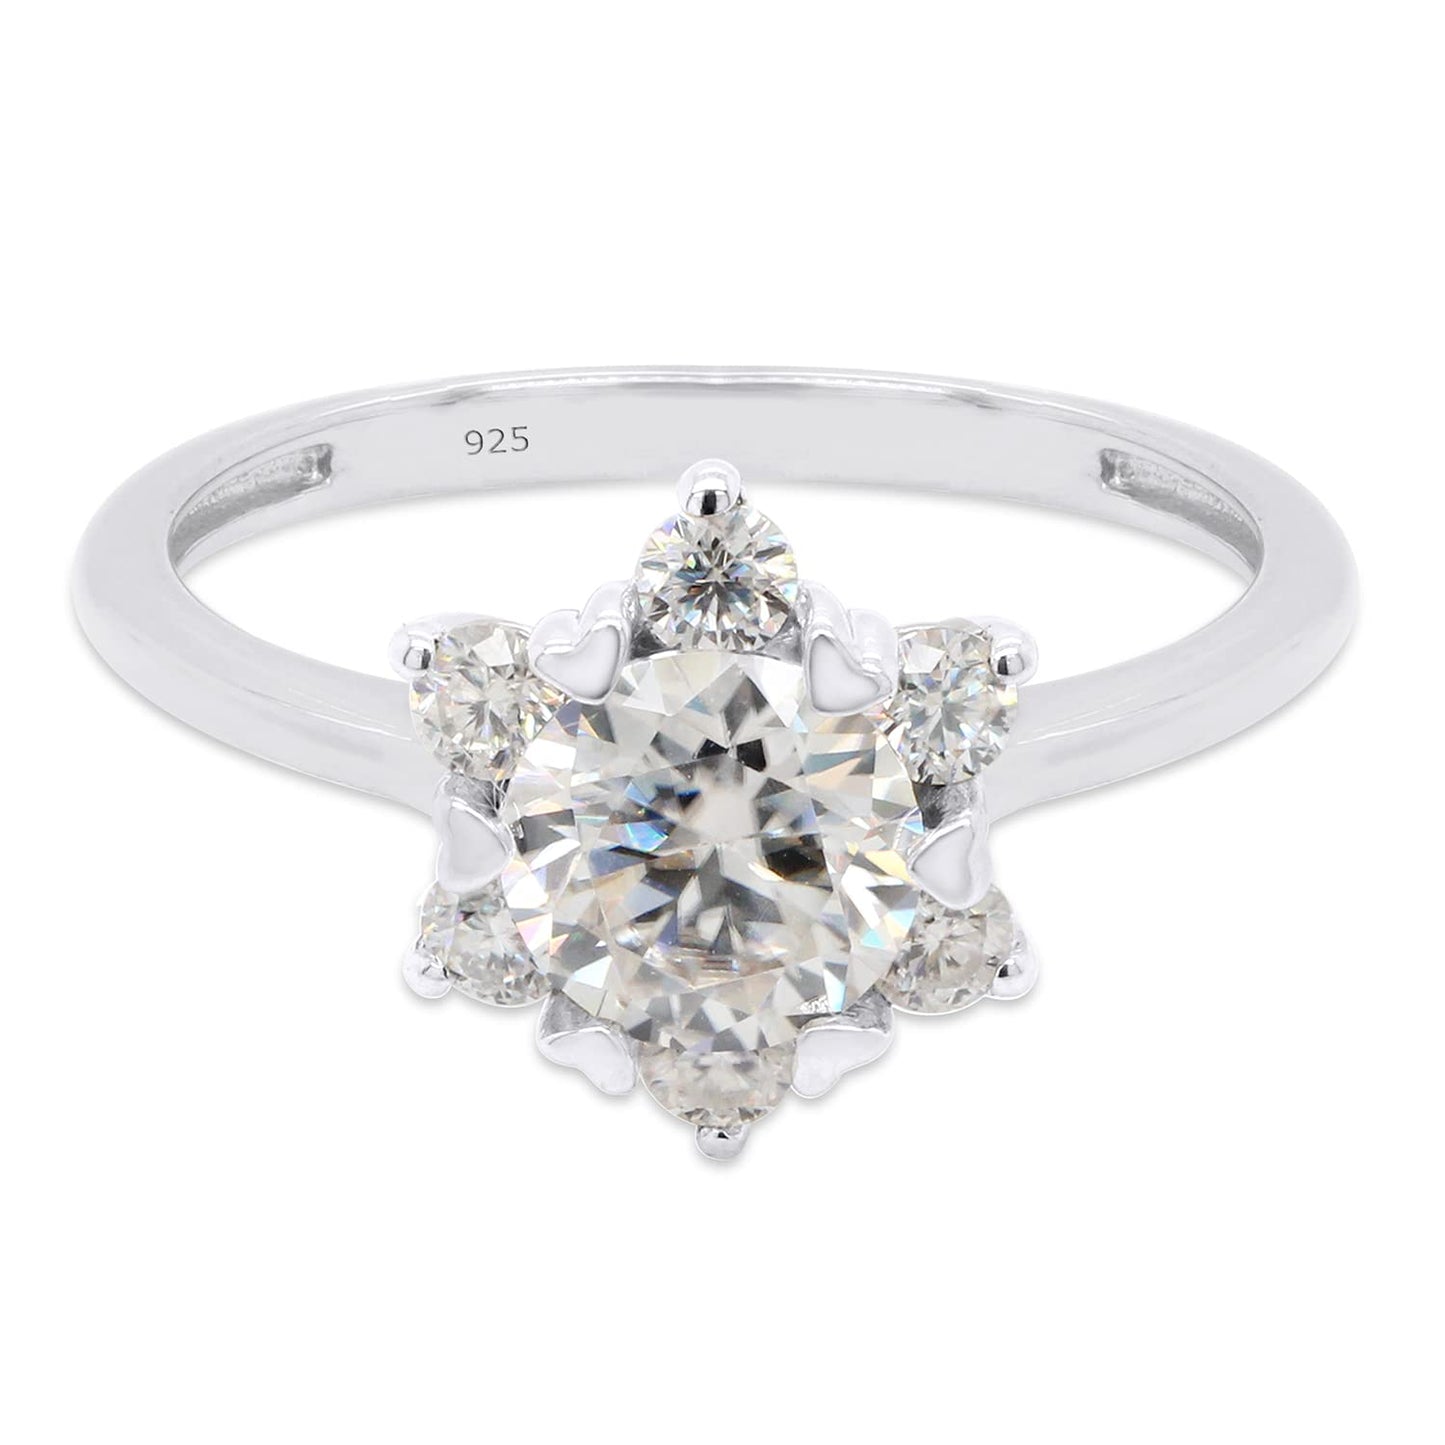 Load image into Gallery viewer, 1 1/3 ct. t.w Center 6.5MM Round Cut Lab Created Moissanite Diamond Flower Engagement Rings for Women in 925 Sterling Silver (1.30 Cttw)
